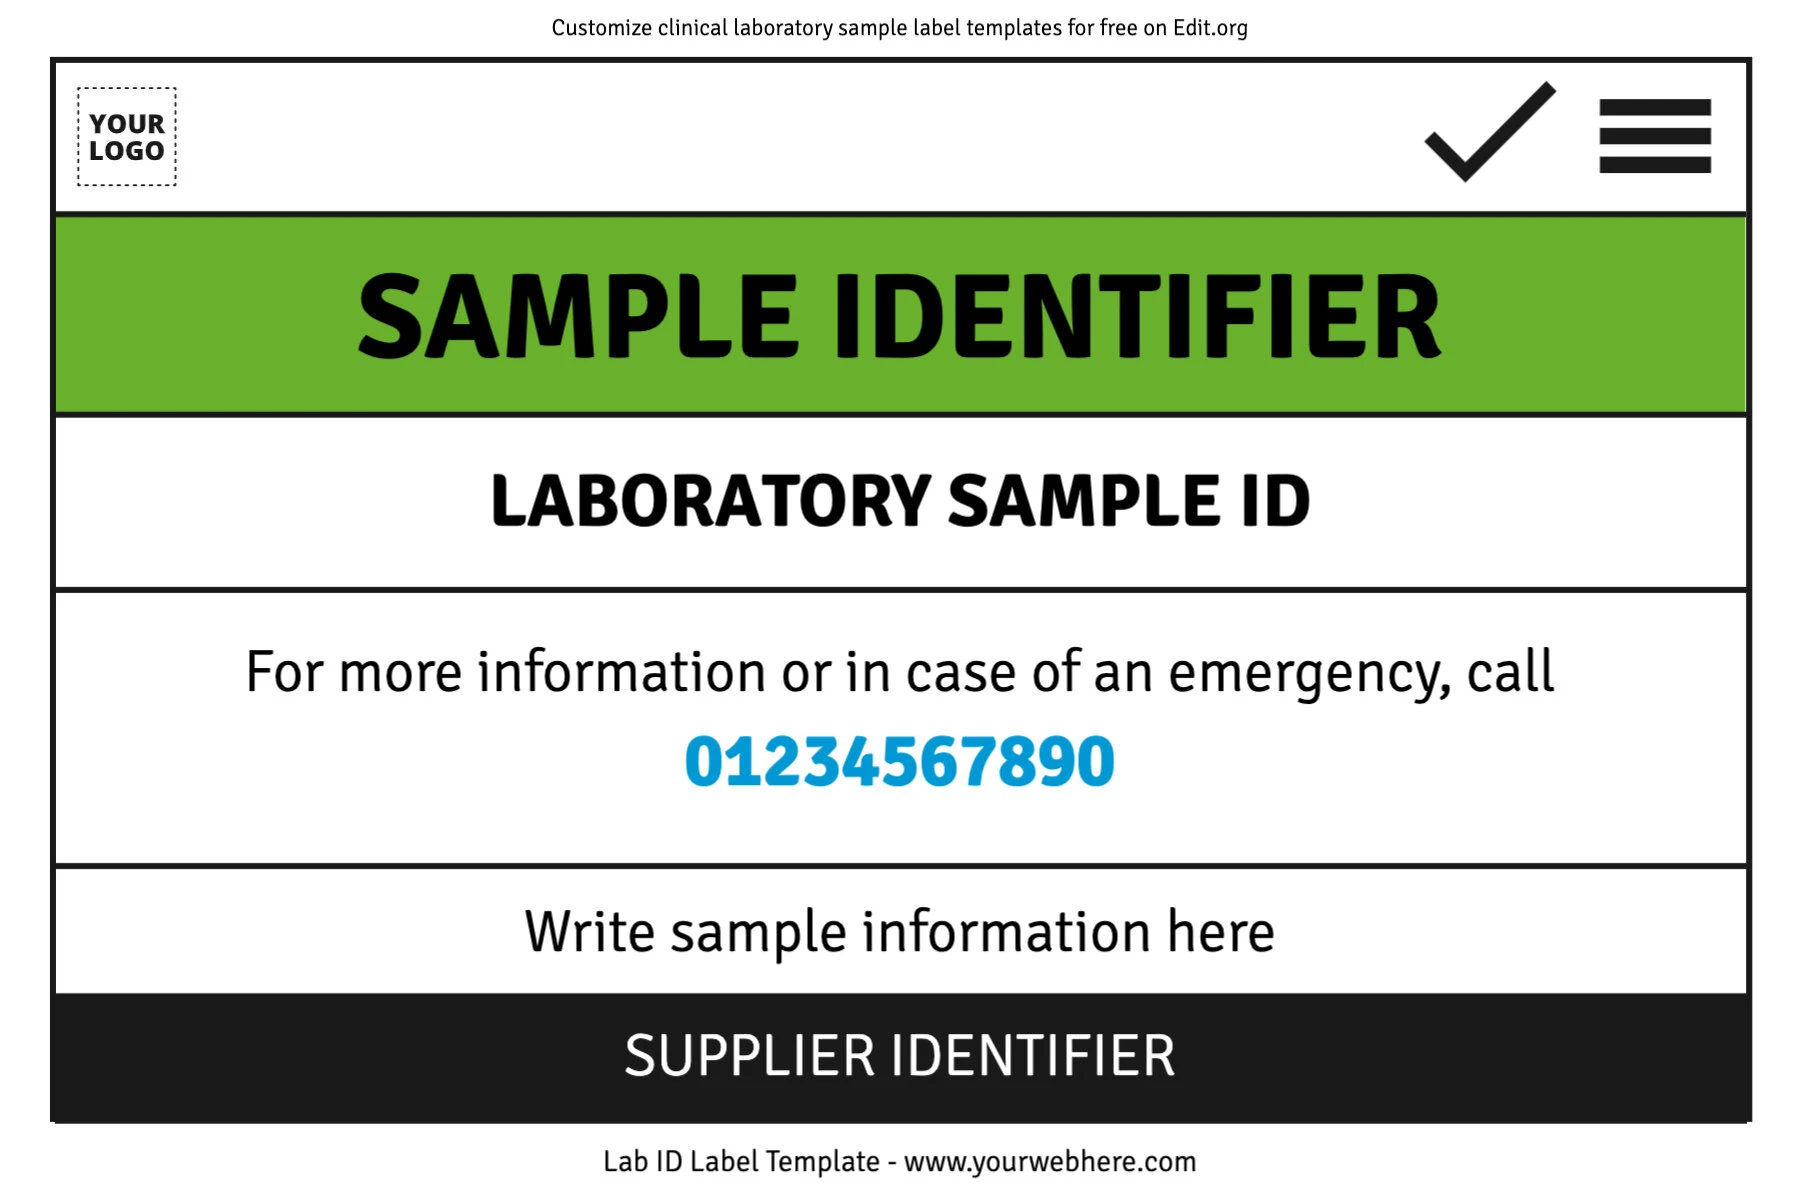 Free Sample ID Labels for test tubes